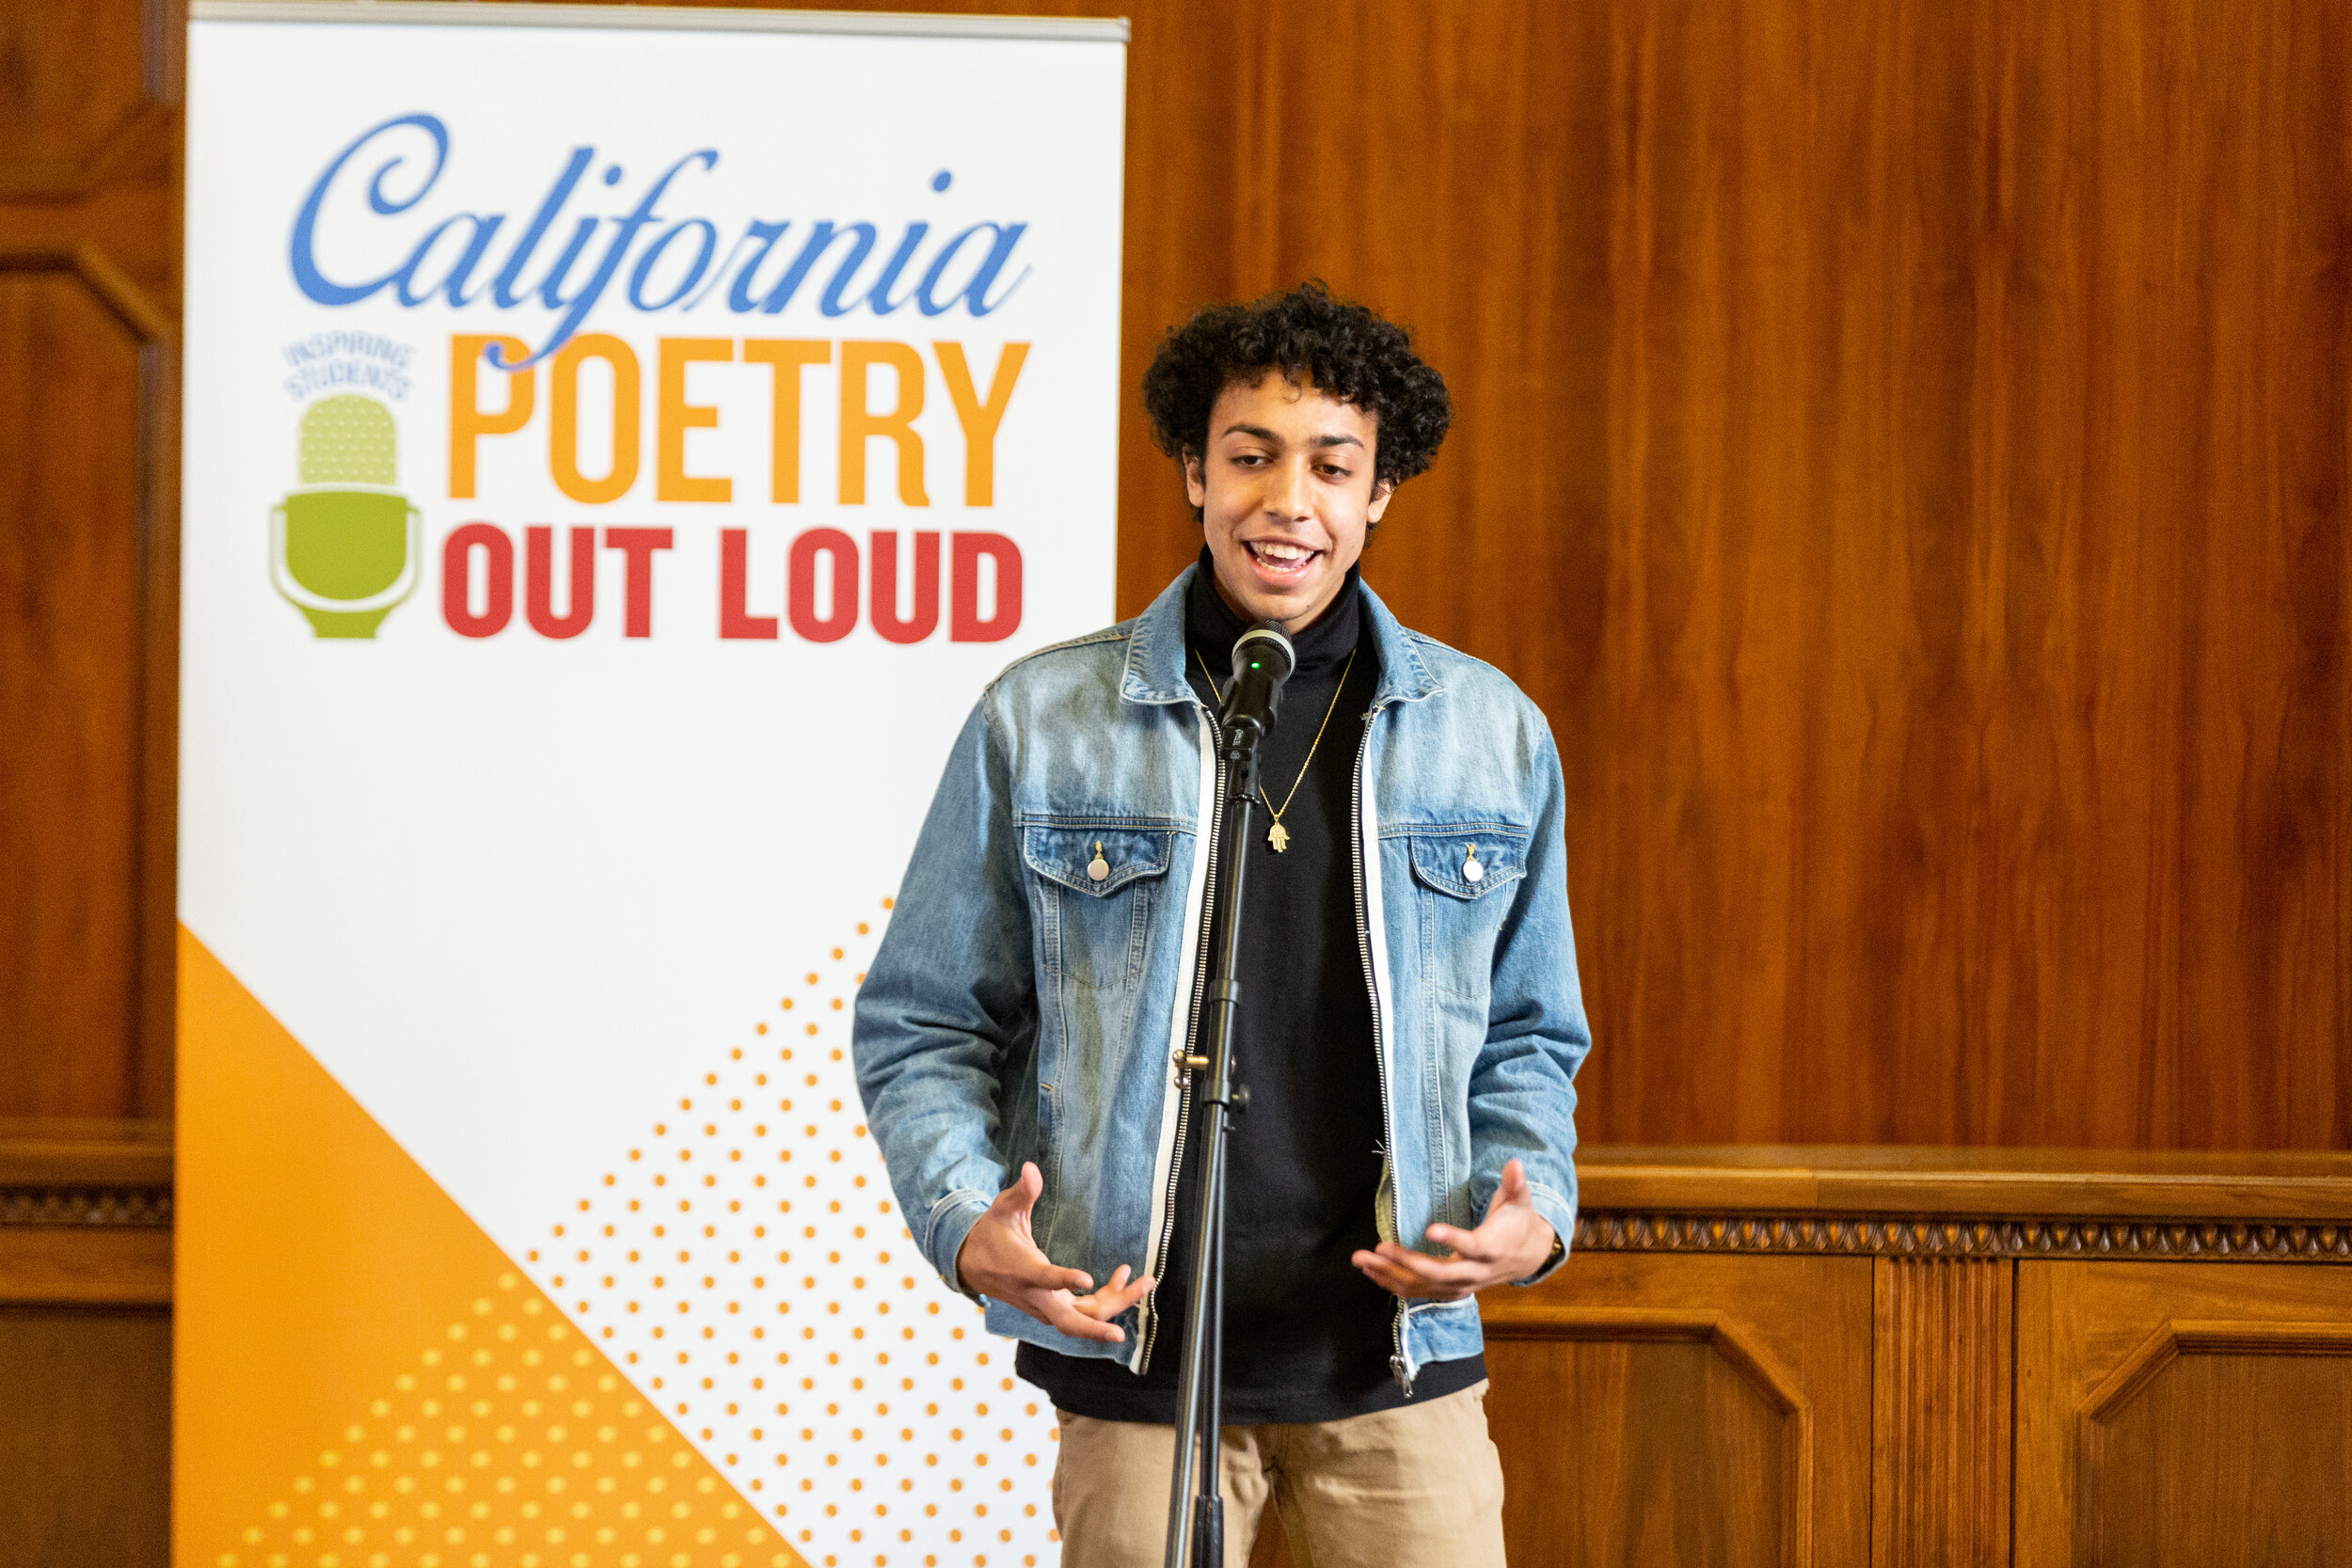 2019 California Poetry Out Loud State Finals